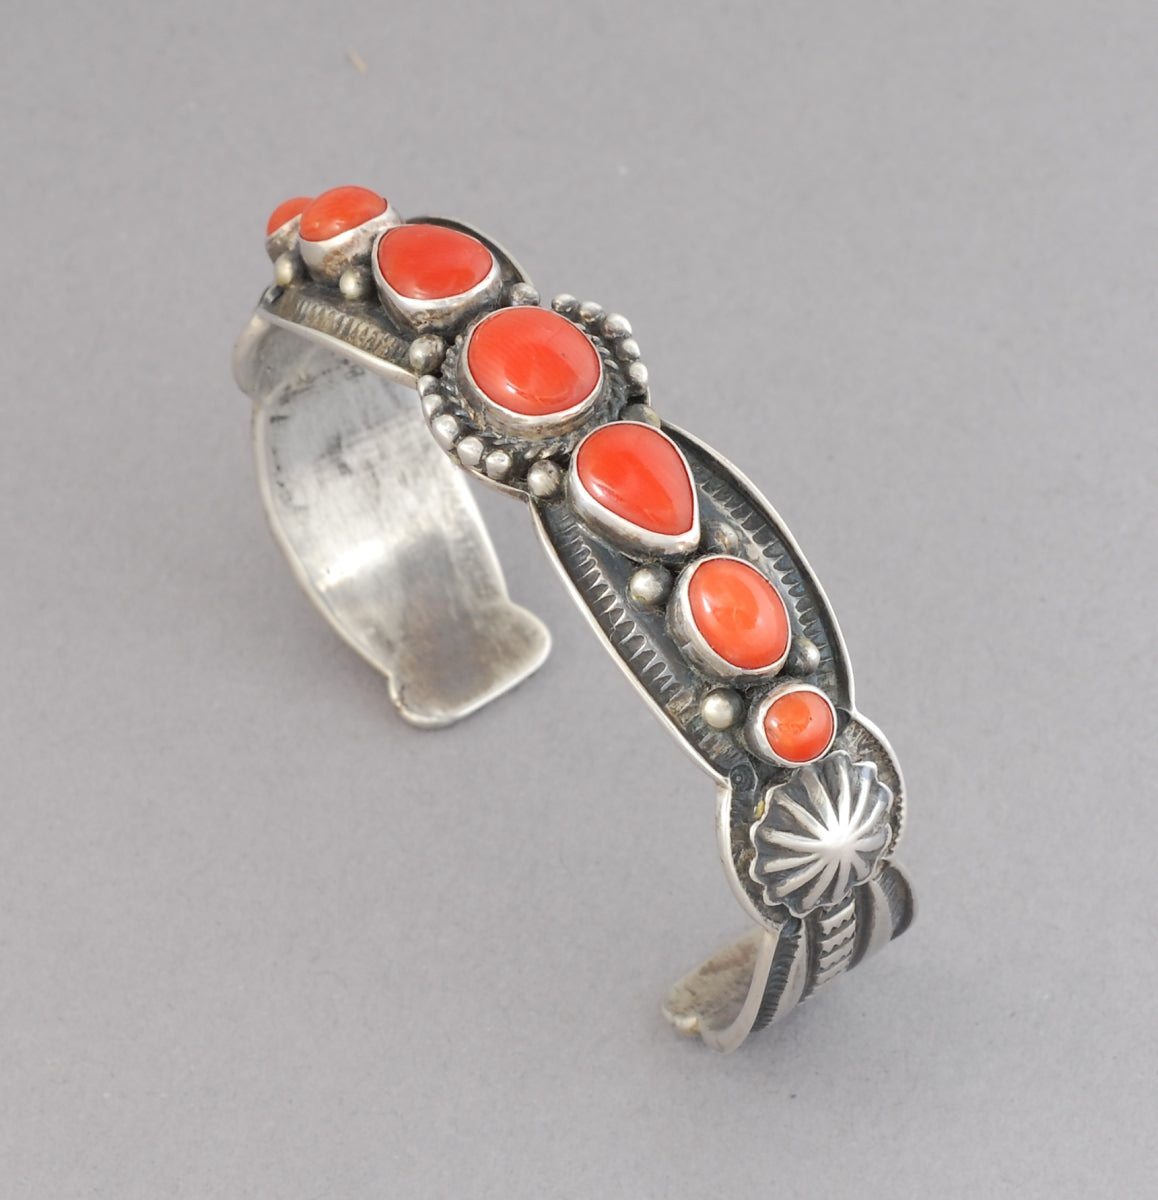 Cuff Bracelet with Red Coral by Darrell Cadman